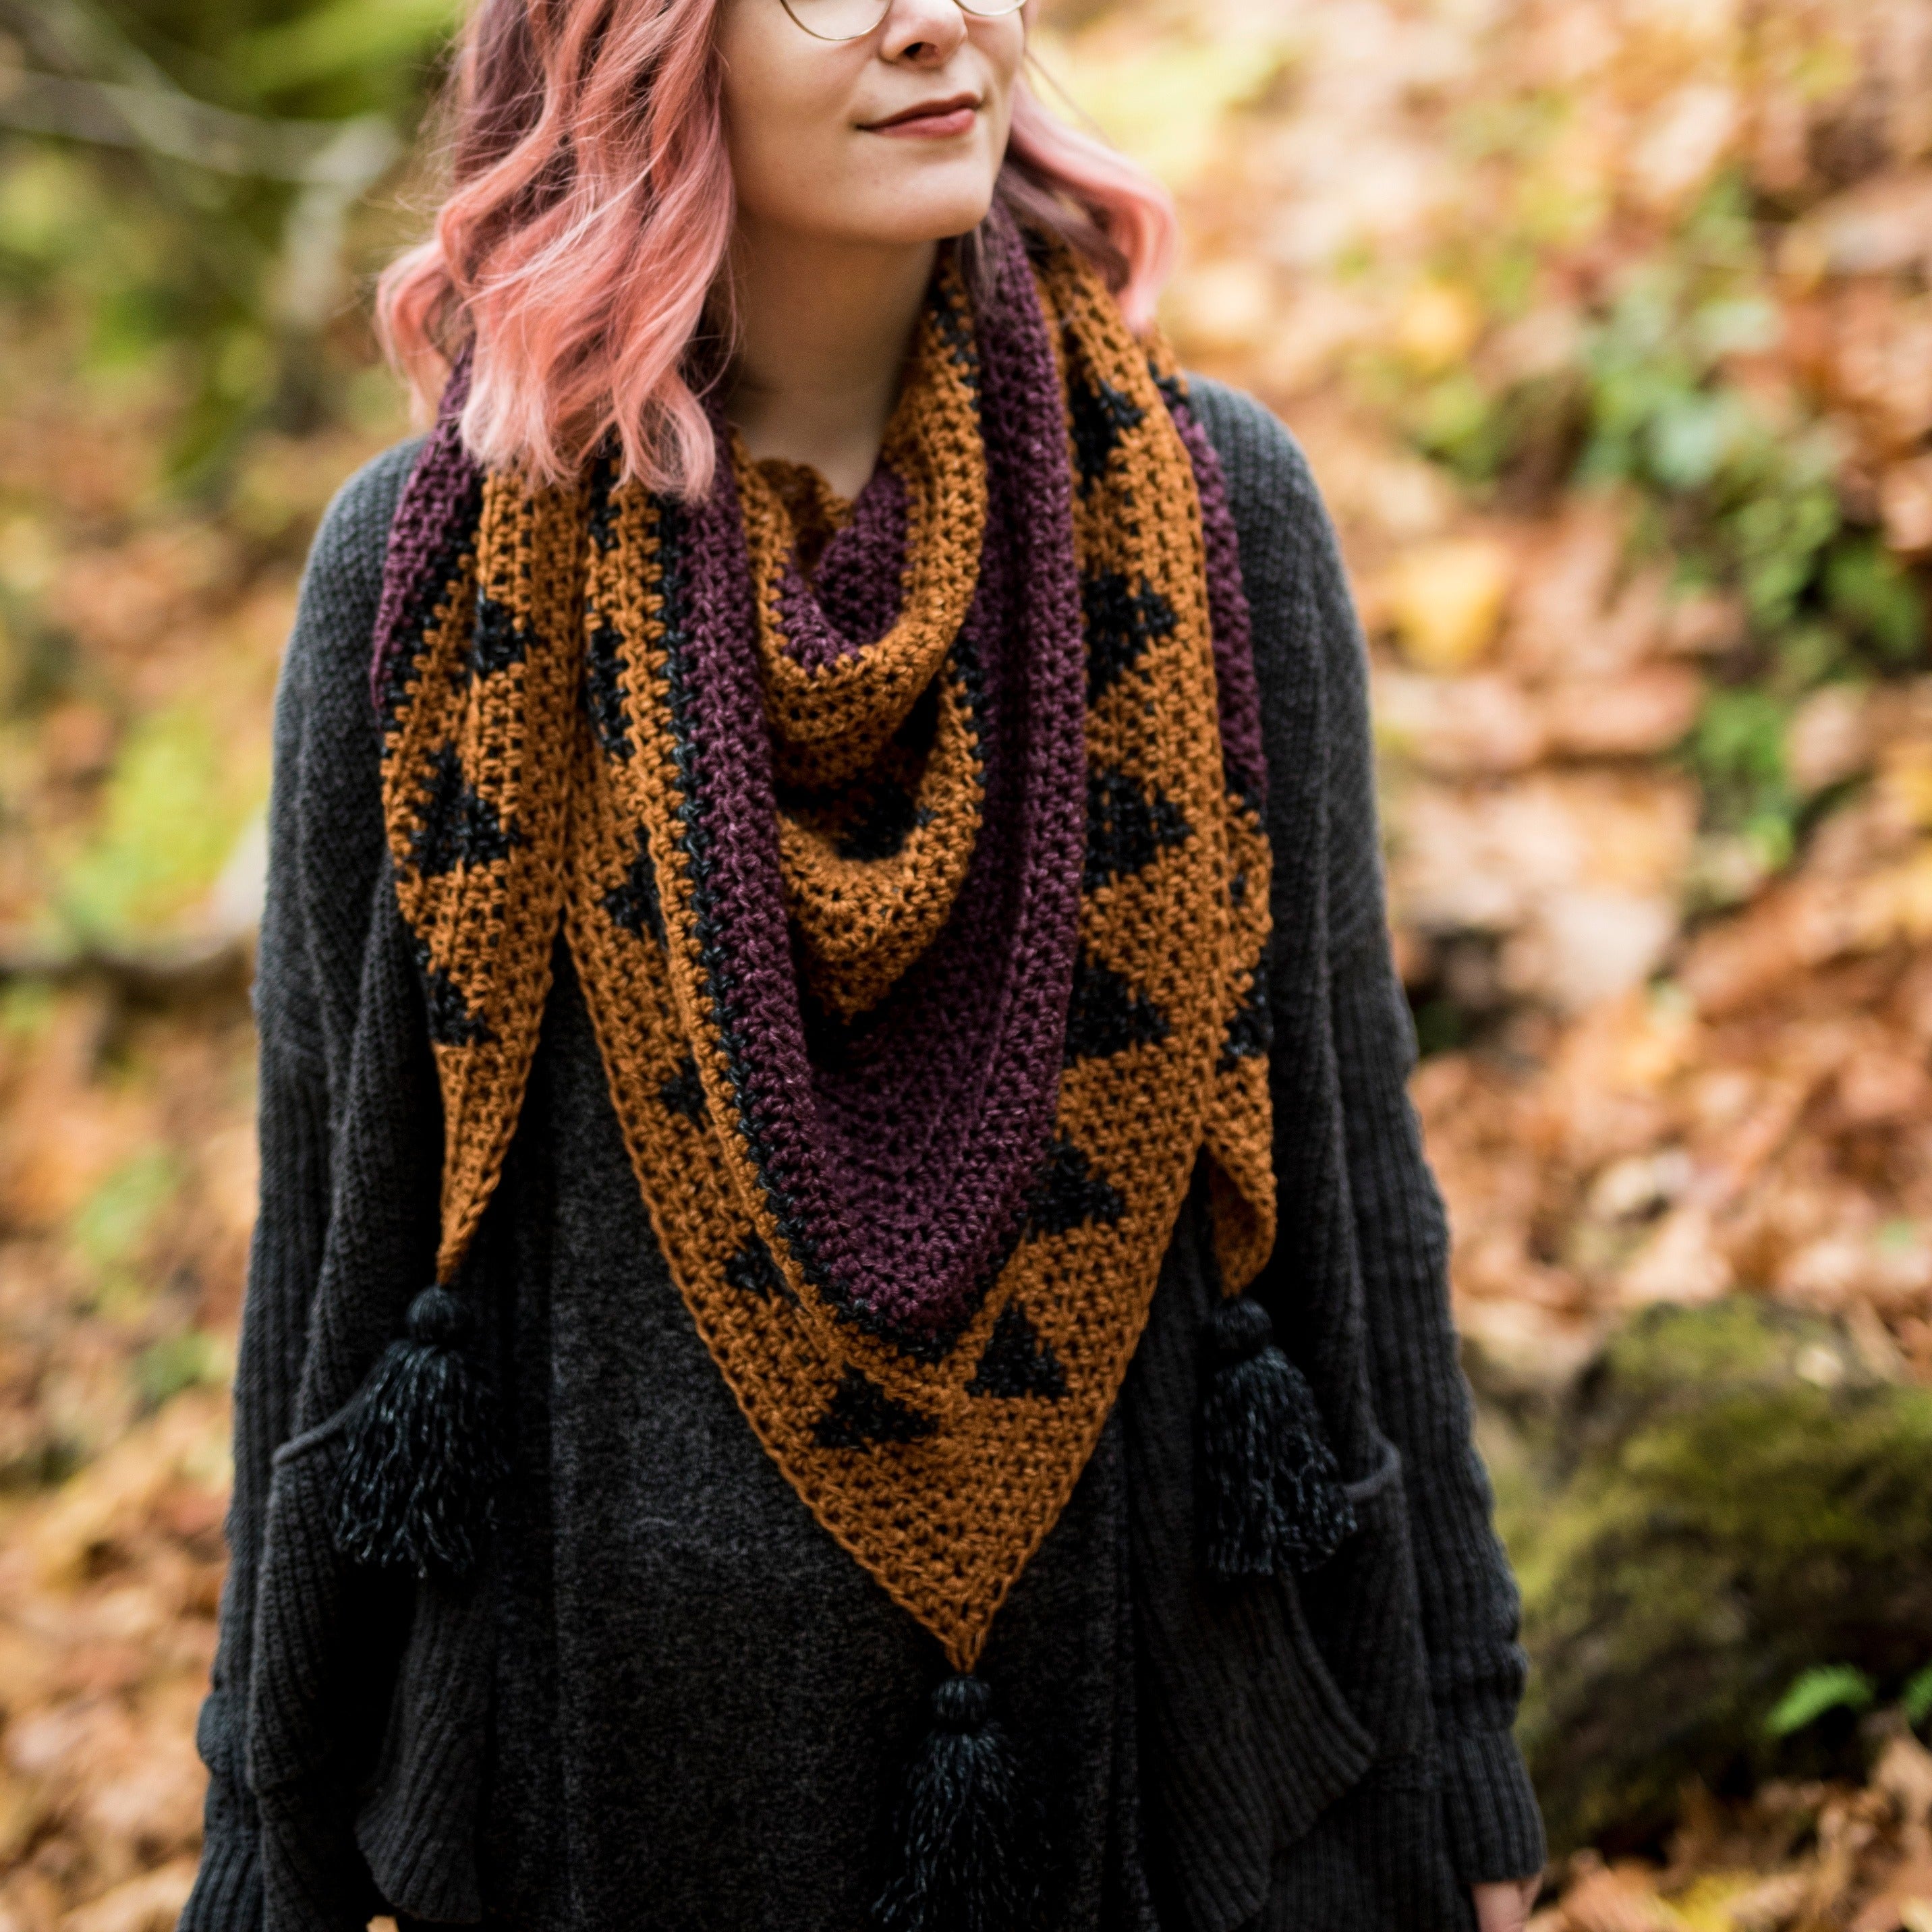 Crochet Pattern: The Magpie Hooded Scarf – Made by Hailey Bailey